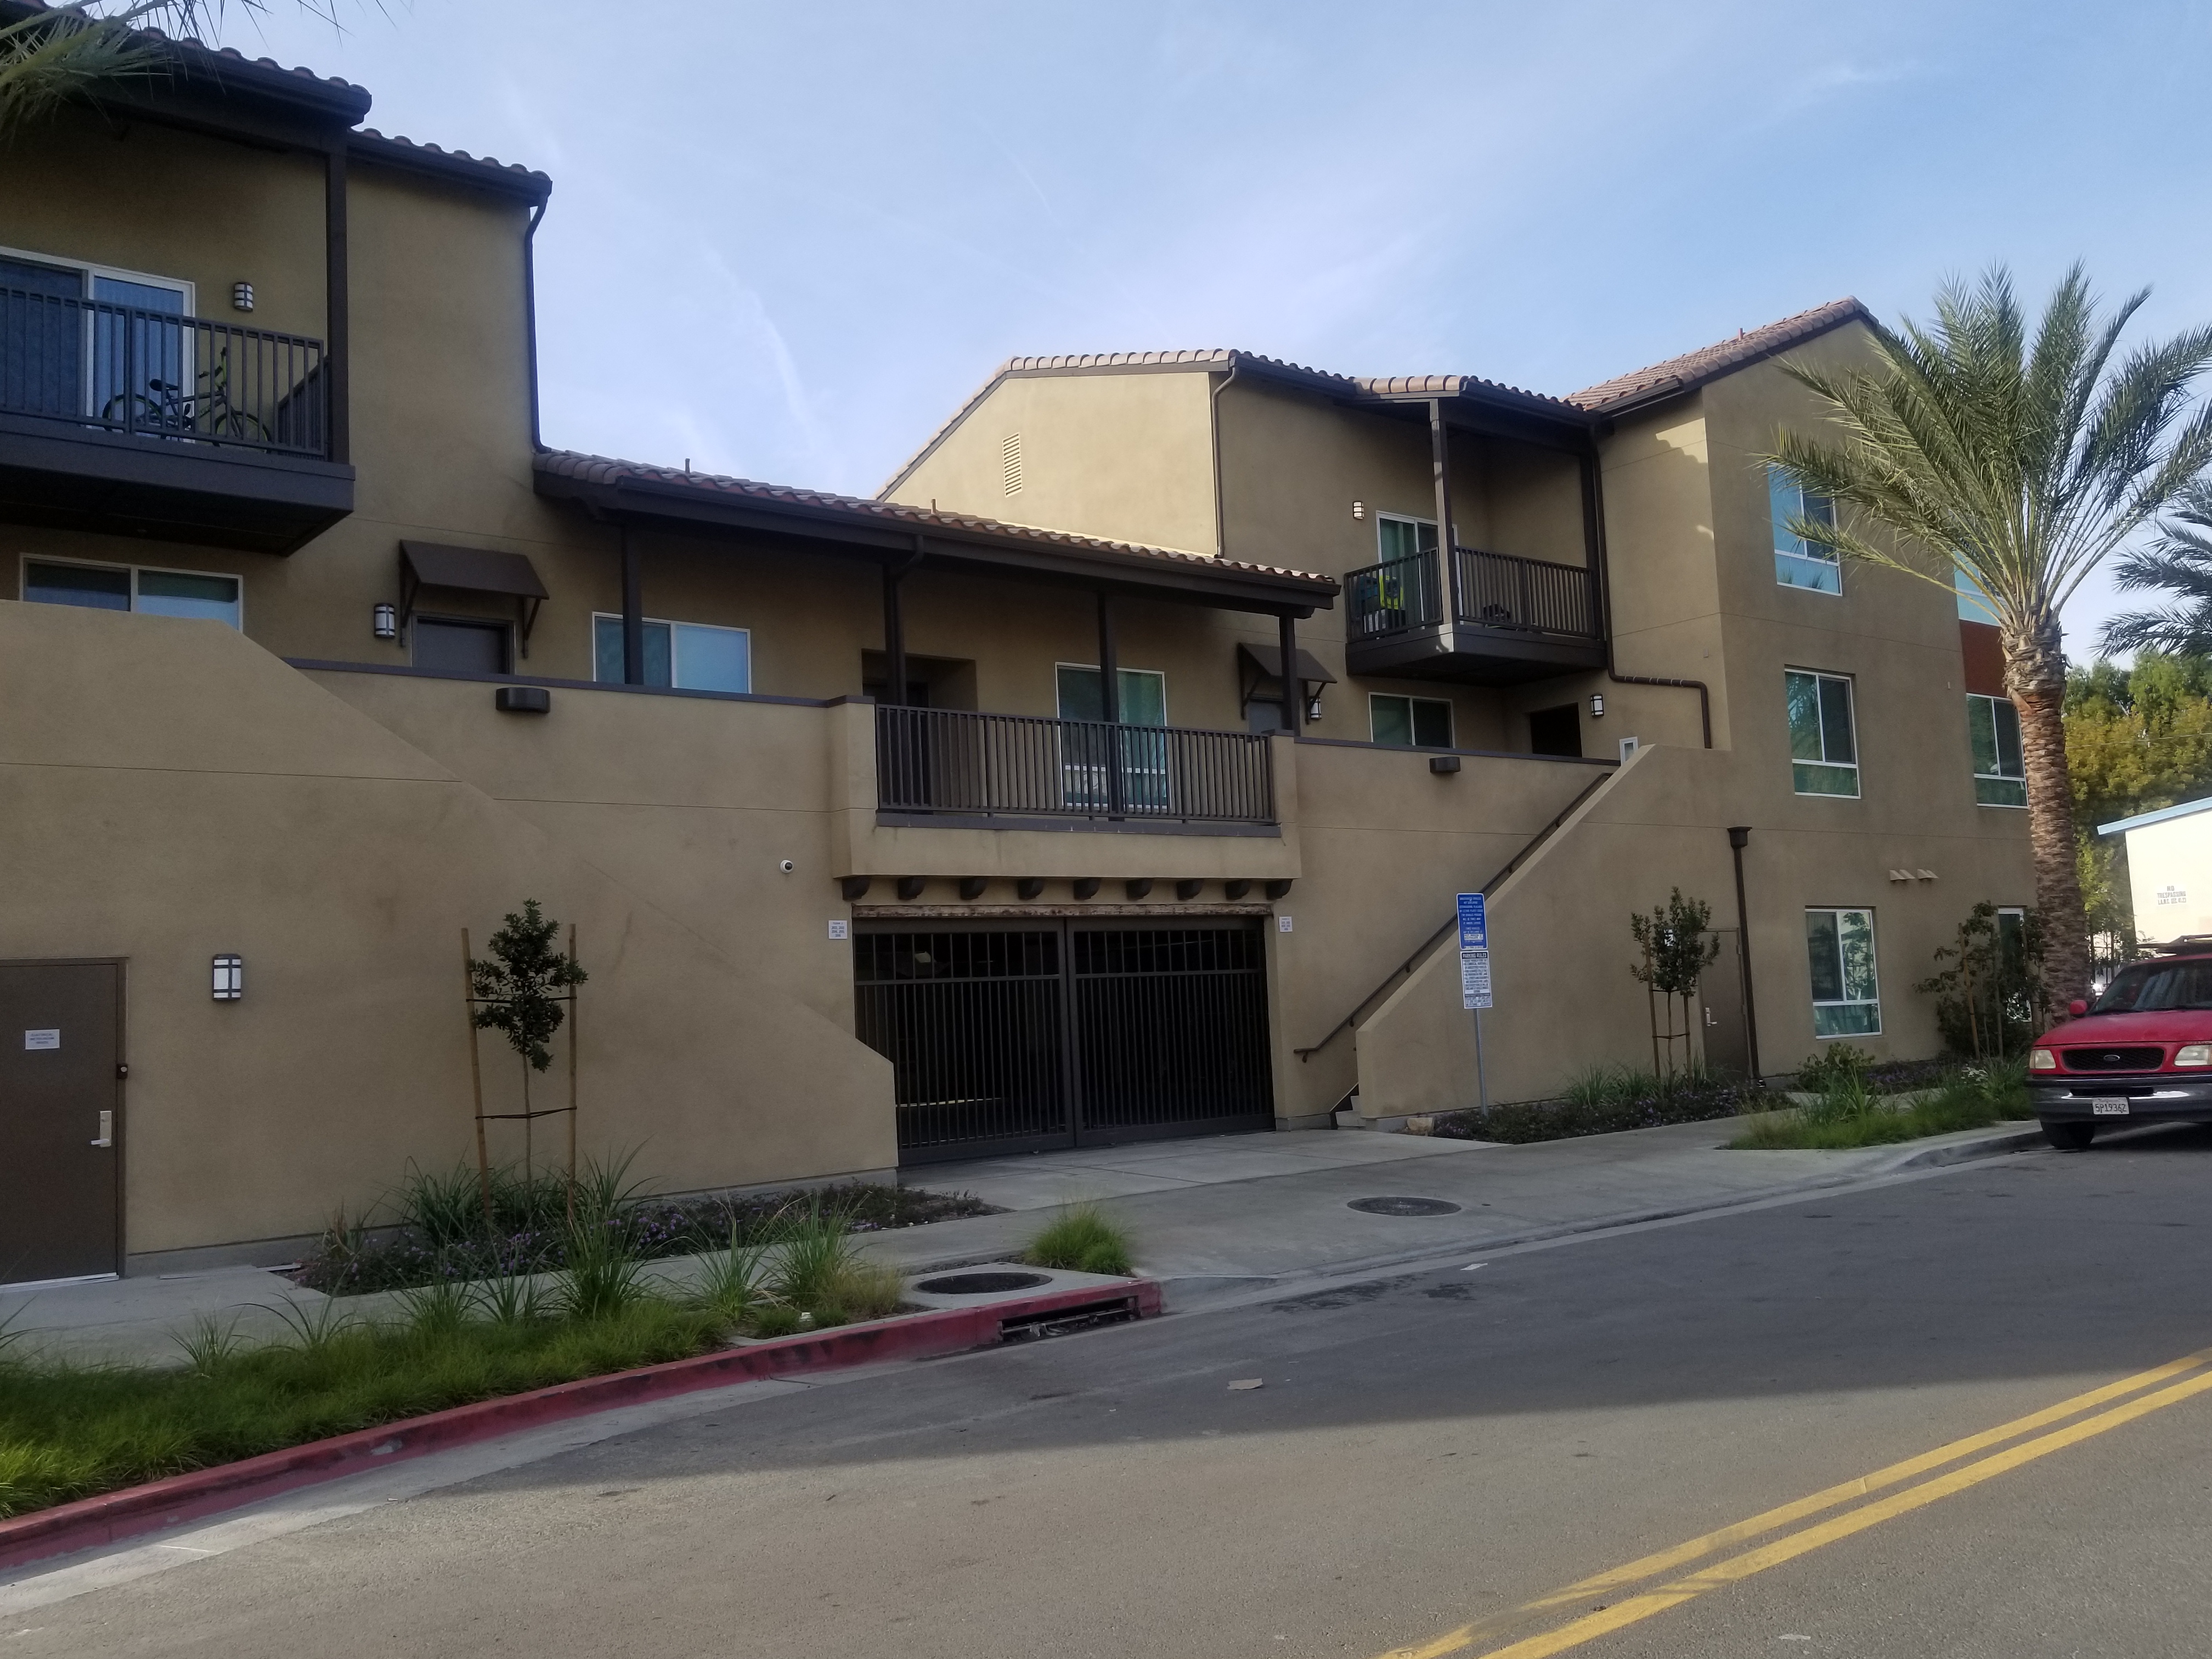 Different view of the outside of a three story light brown building. Ground floor has a gated parking lot entrance. There are newly planted trees, plants and a palm tree in front of the building. There are two staircases across from another that lead to t